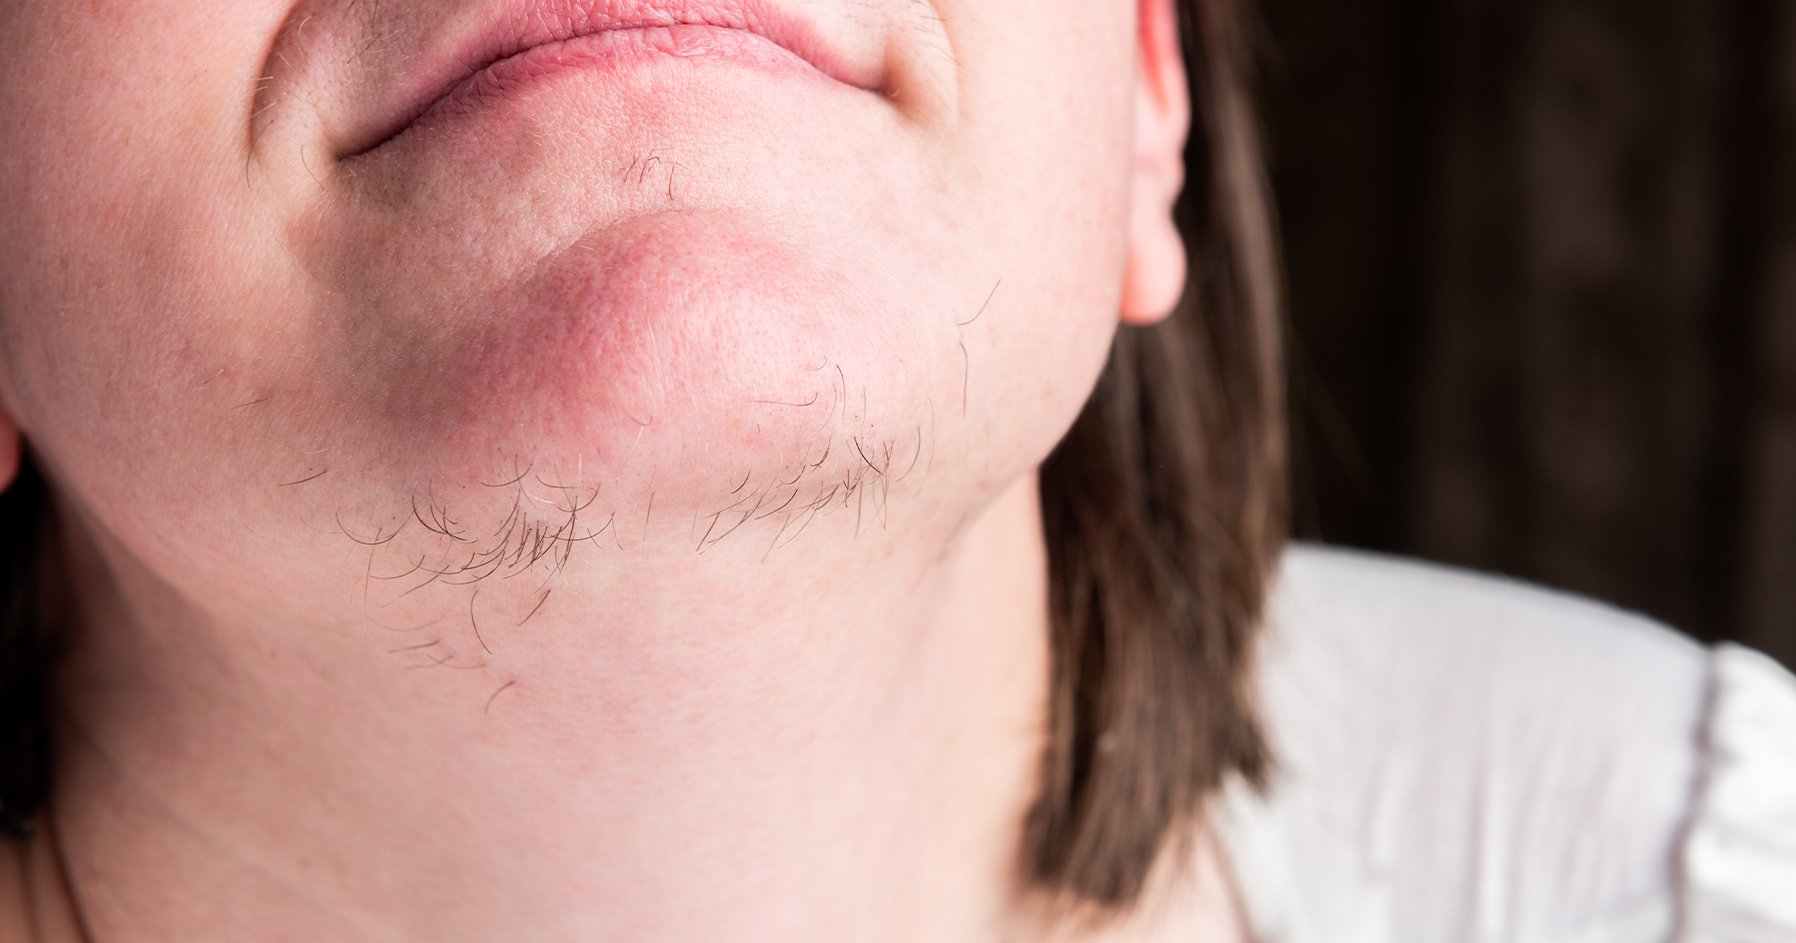 Image of effects of hirsutism on body.